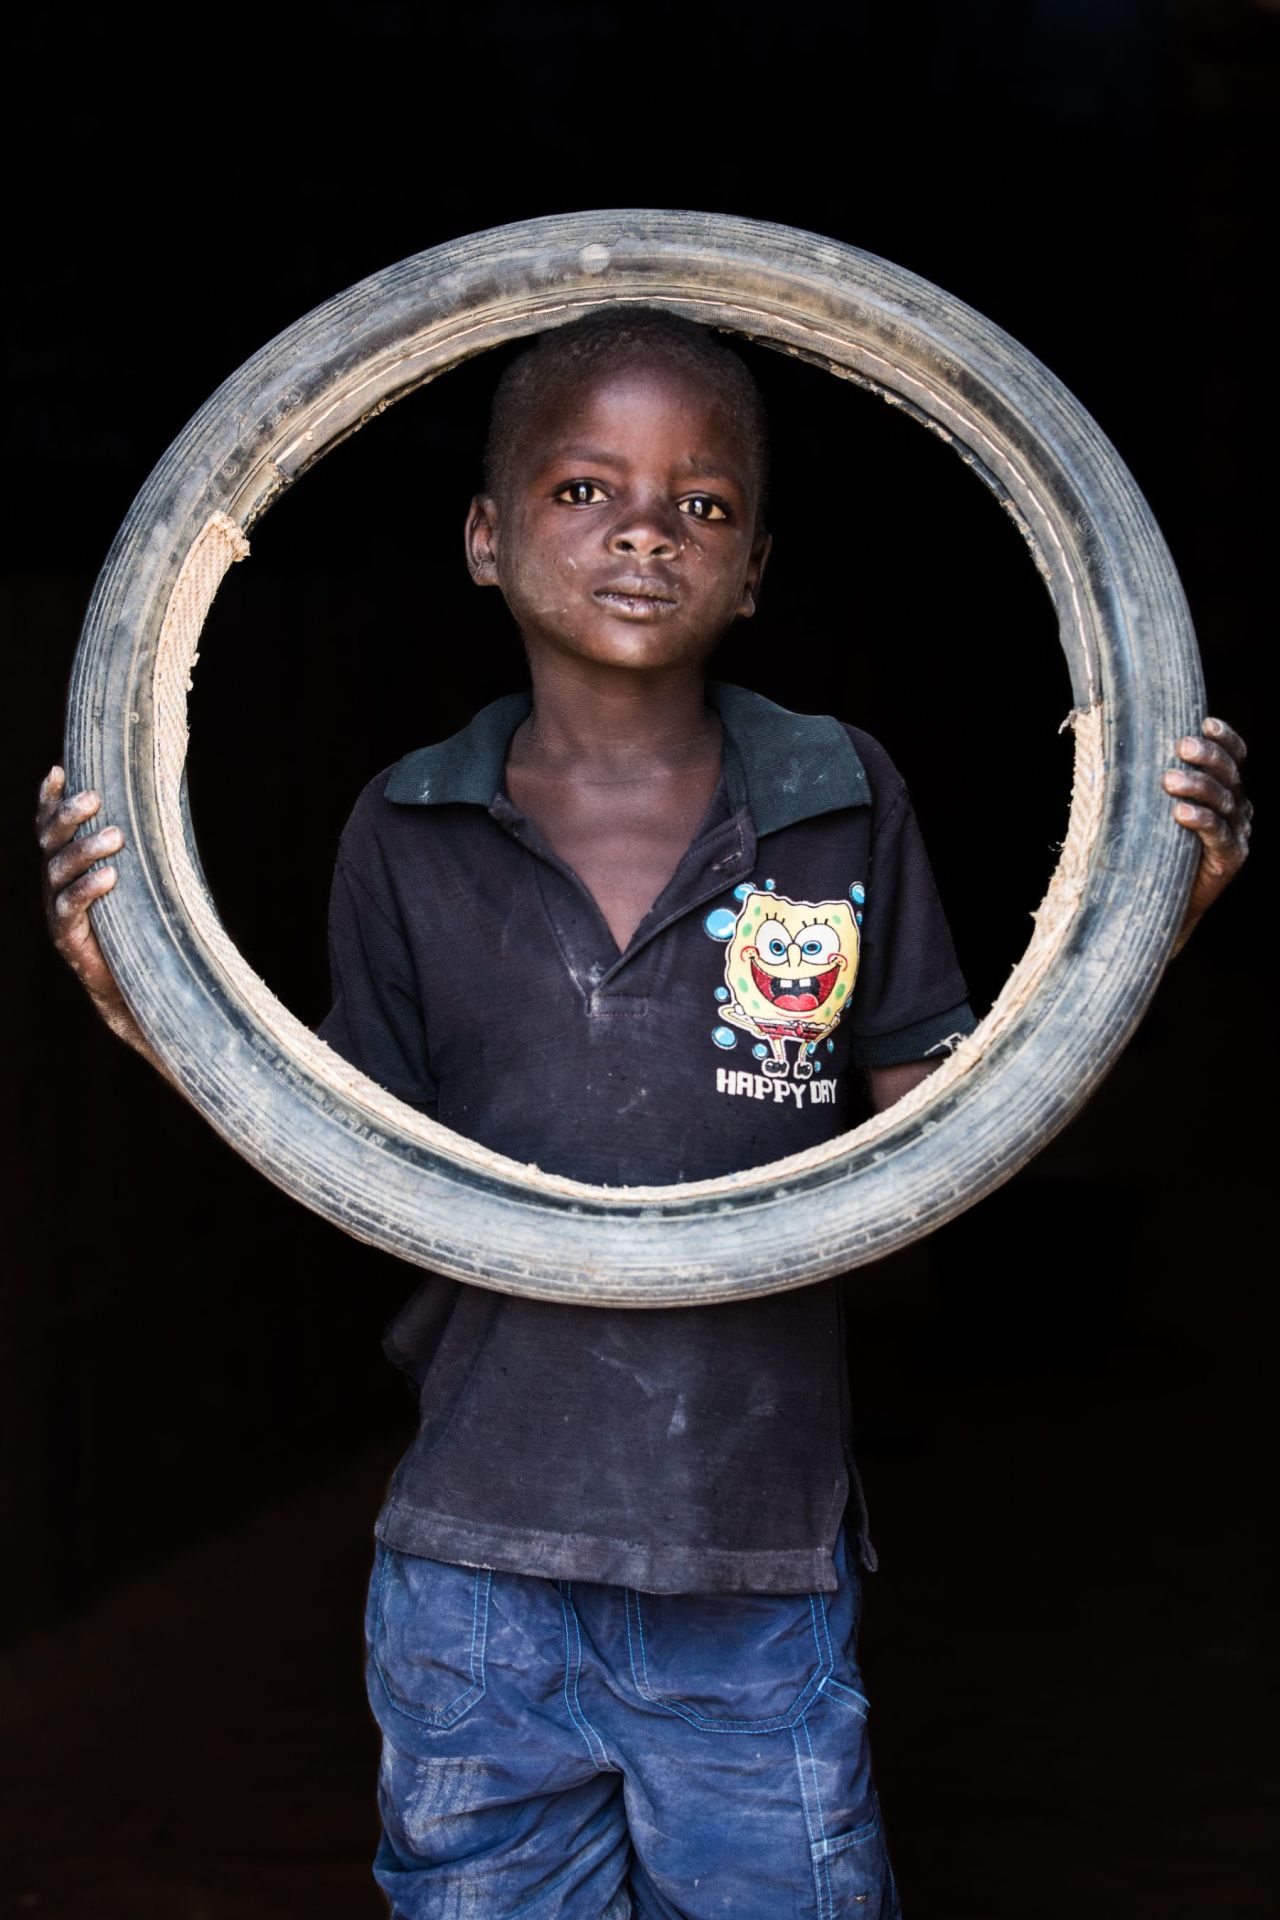 Habou Lamirou (Driver), Niger. "I want to be a driver so I can help my parents."